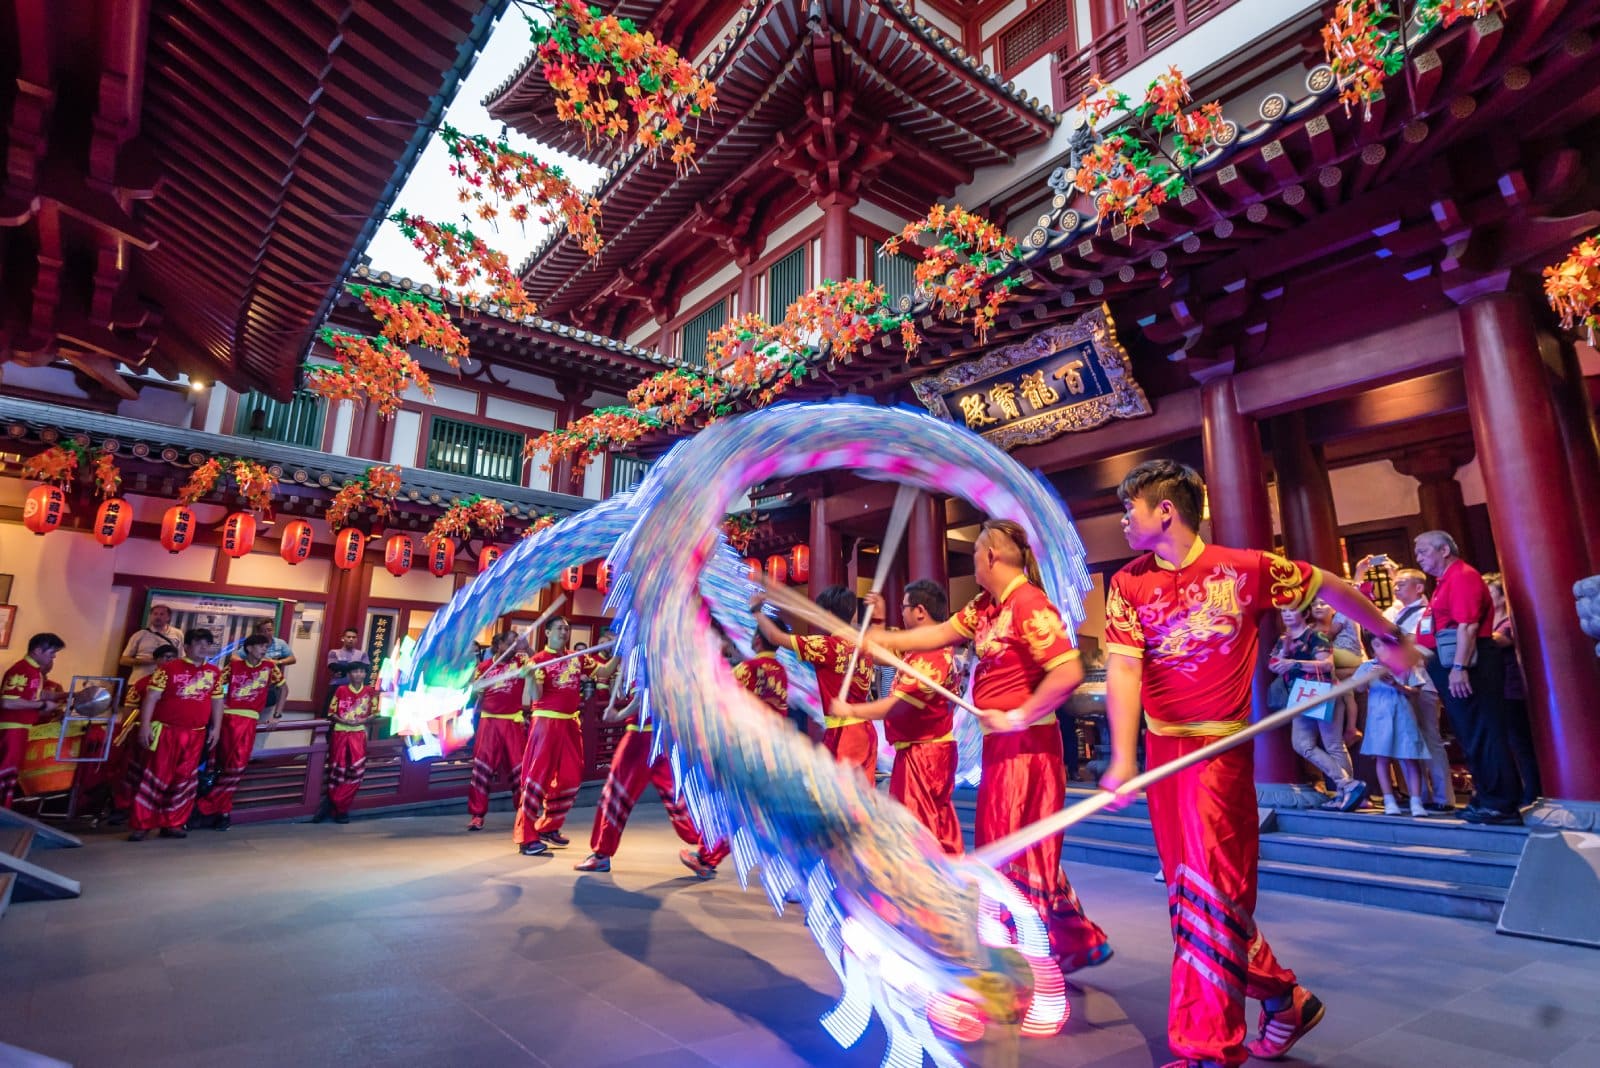 <p class="wp-caption-text">Image Credit: Shutterstock / maison photography</p>  <p>With nine tones and multiple characters for a single syllable, Cantonese is like Mandarin’s even more complicated cousin. It’s the linguistic equivalent of juggling flaming swords, blindfolded, on a unicycle.</p>